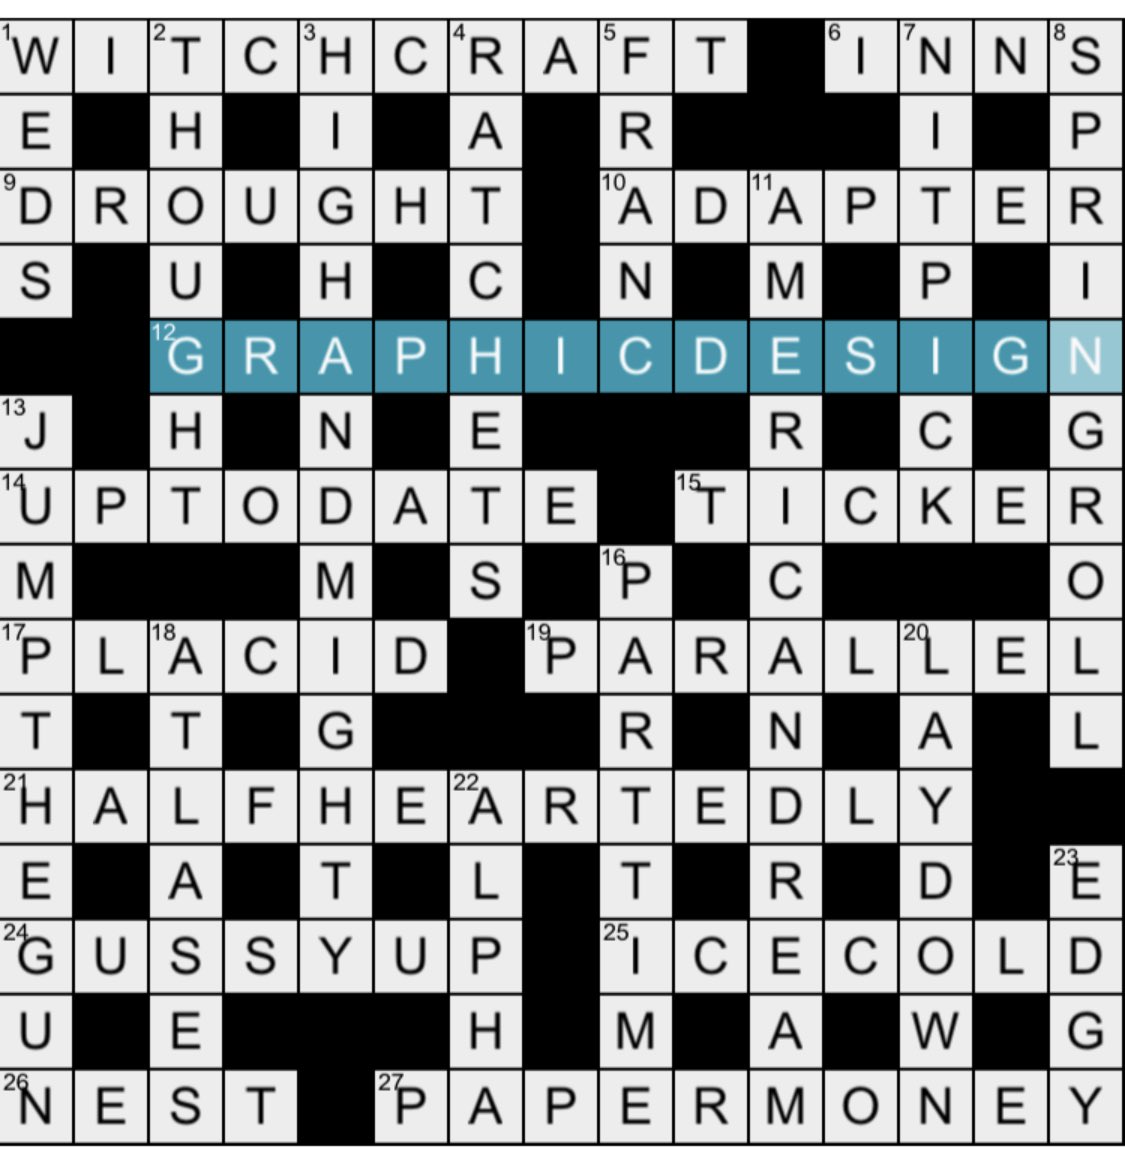 Take your victories where you can! When (IF!) I finish the crossword I always assume it was cos it was an easy one. So delighted to discover we today’s was classified as hard. And I did it!! #WellDoneMe #CrypticCrossword